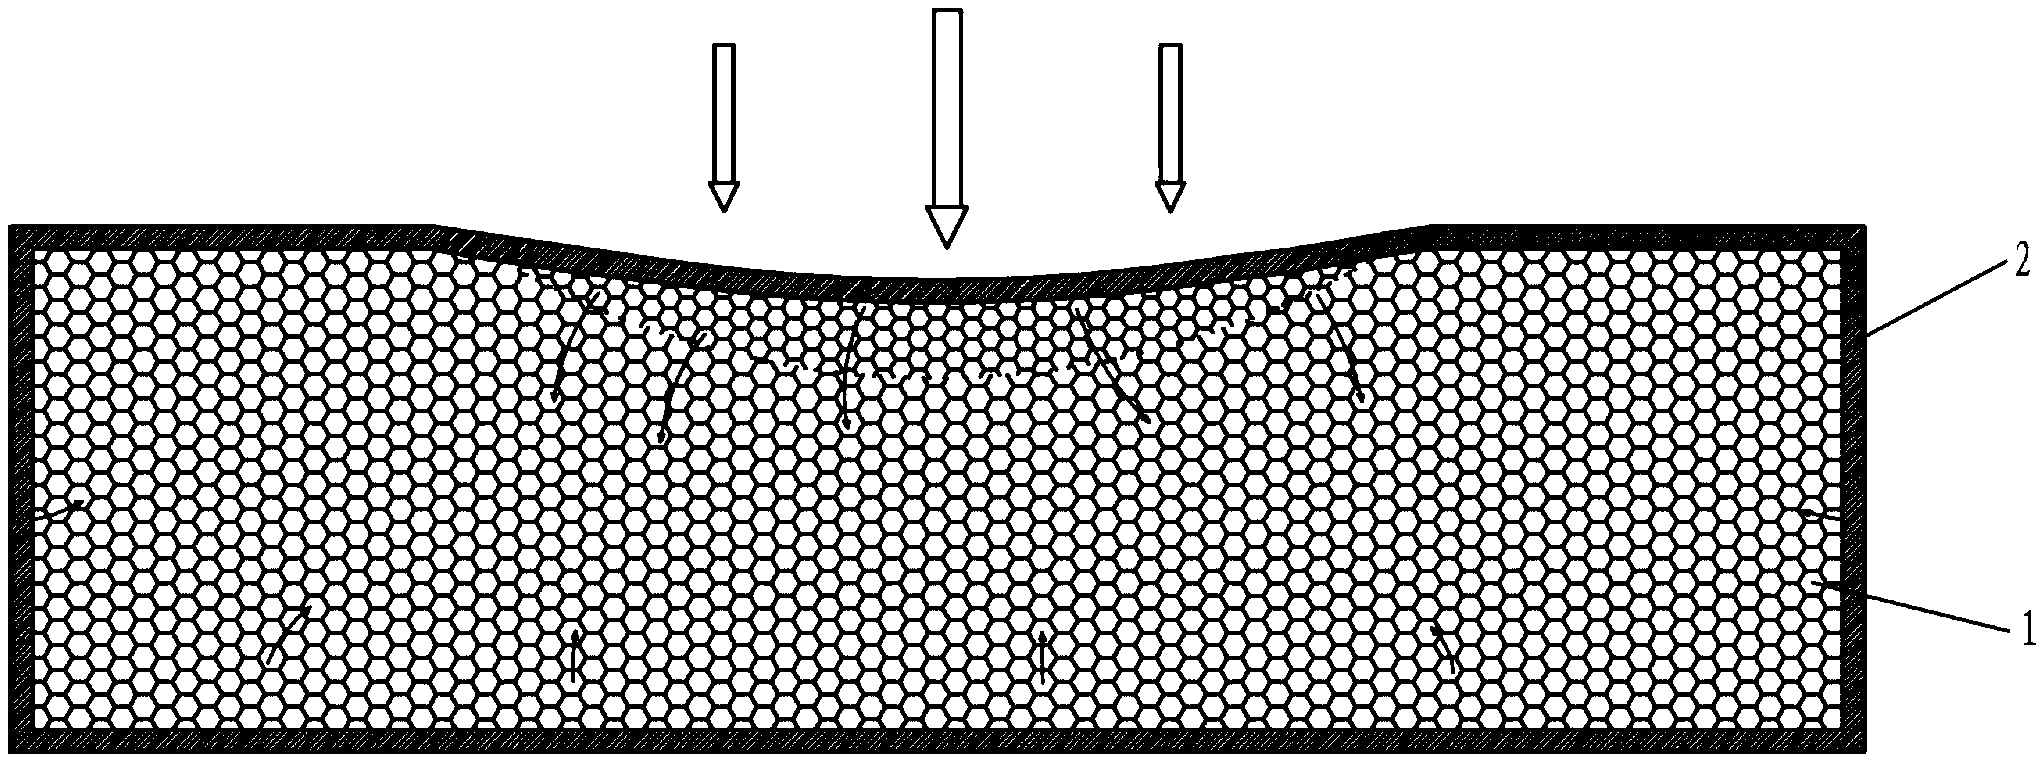 Damping structure with flexible airtight materials wrapping soft foaming materials in sealing mode